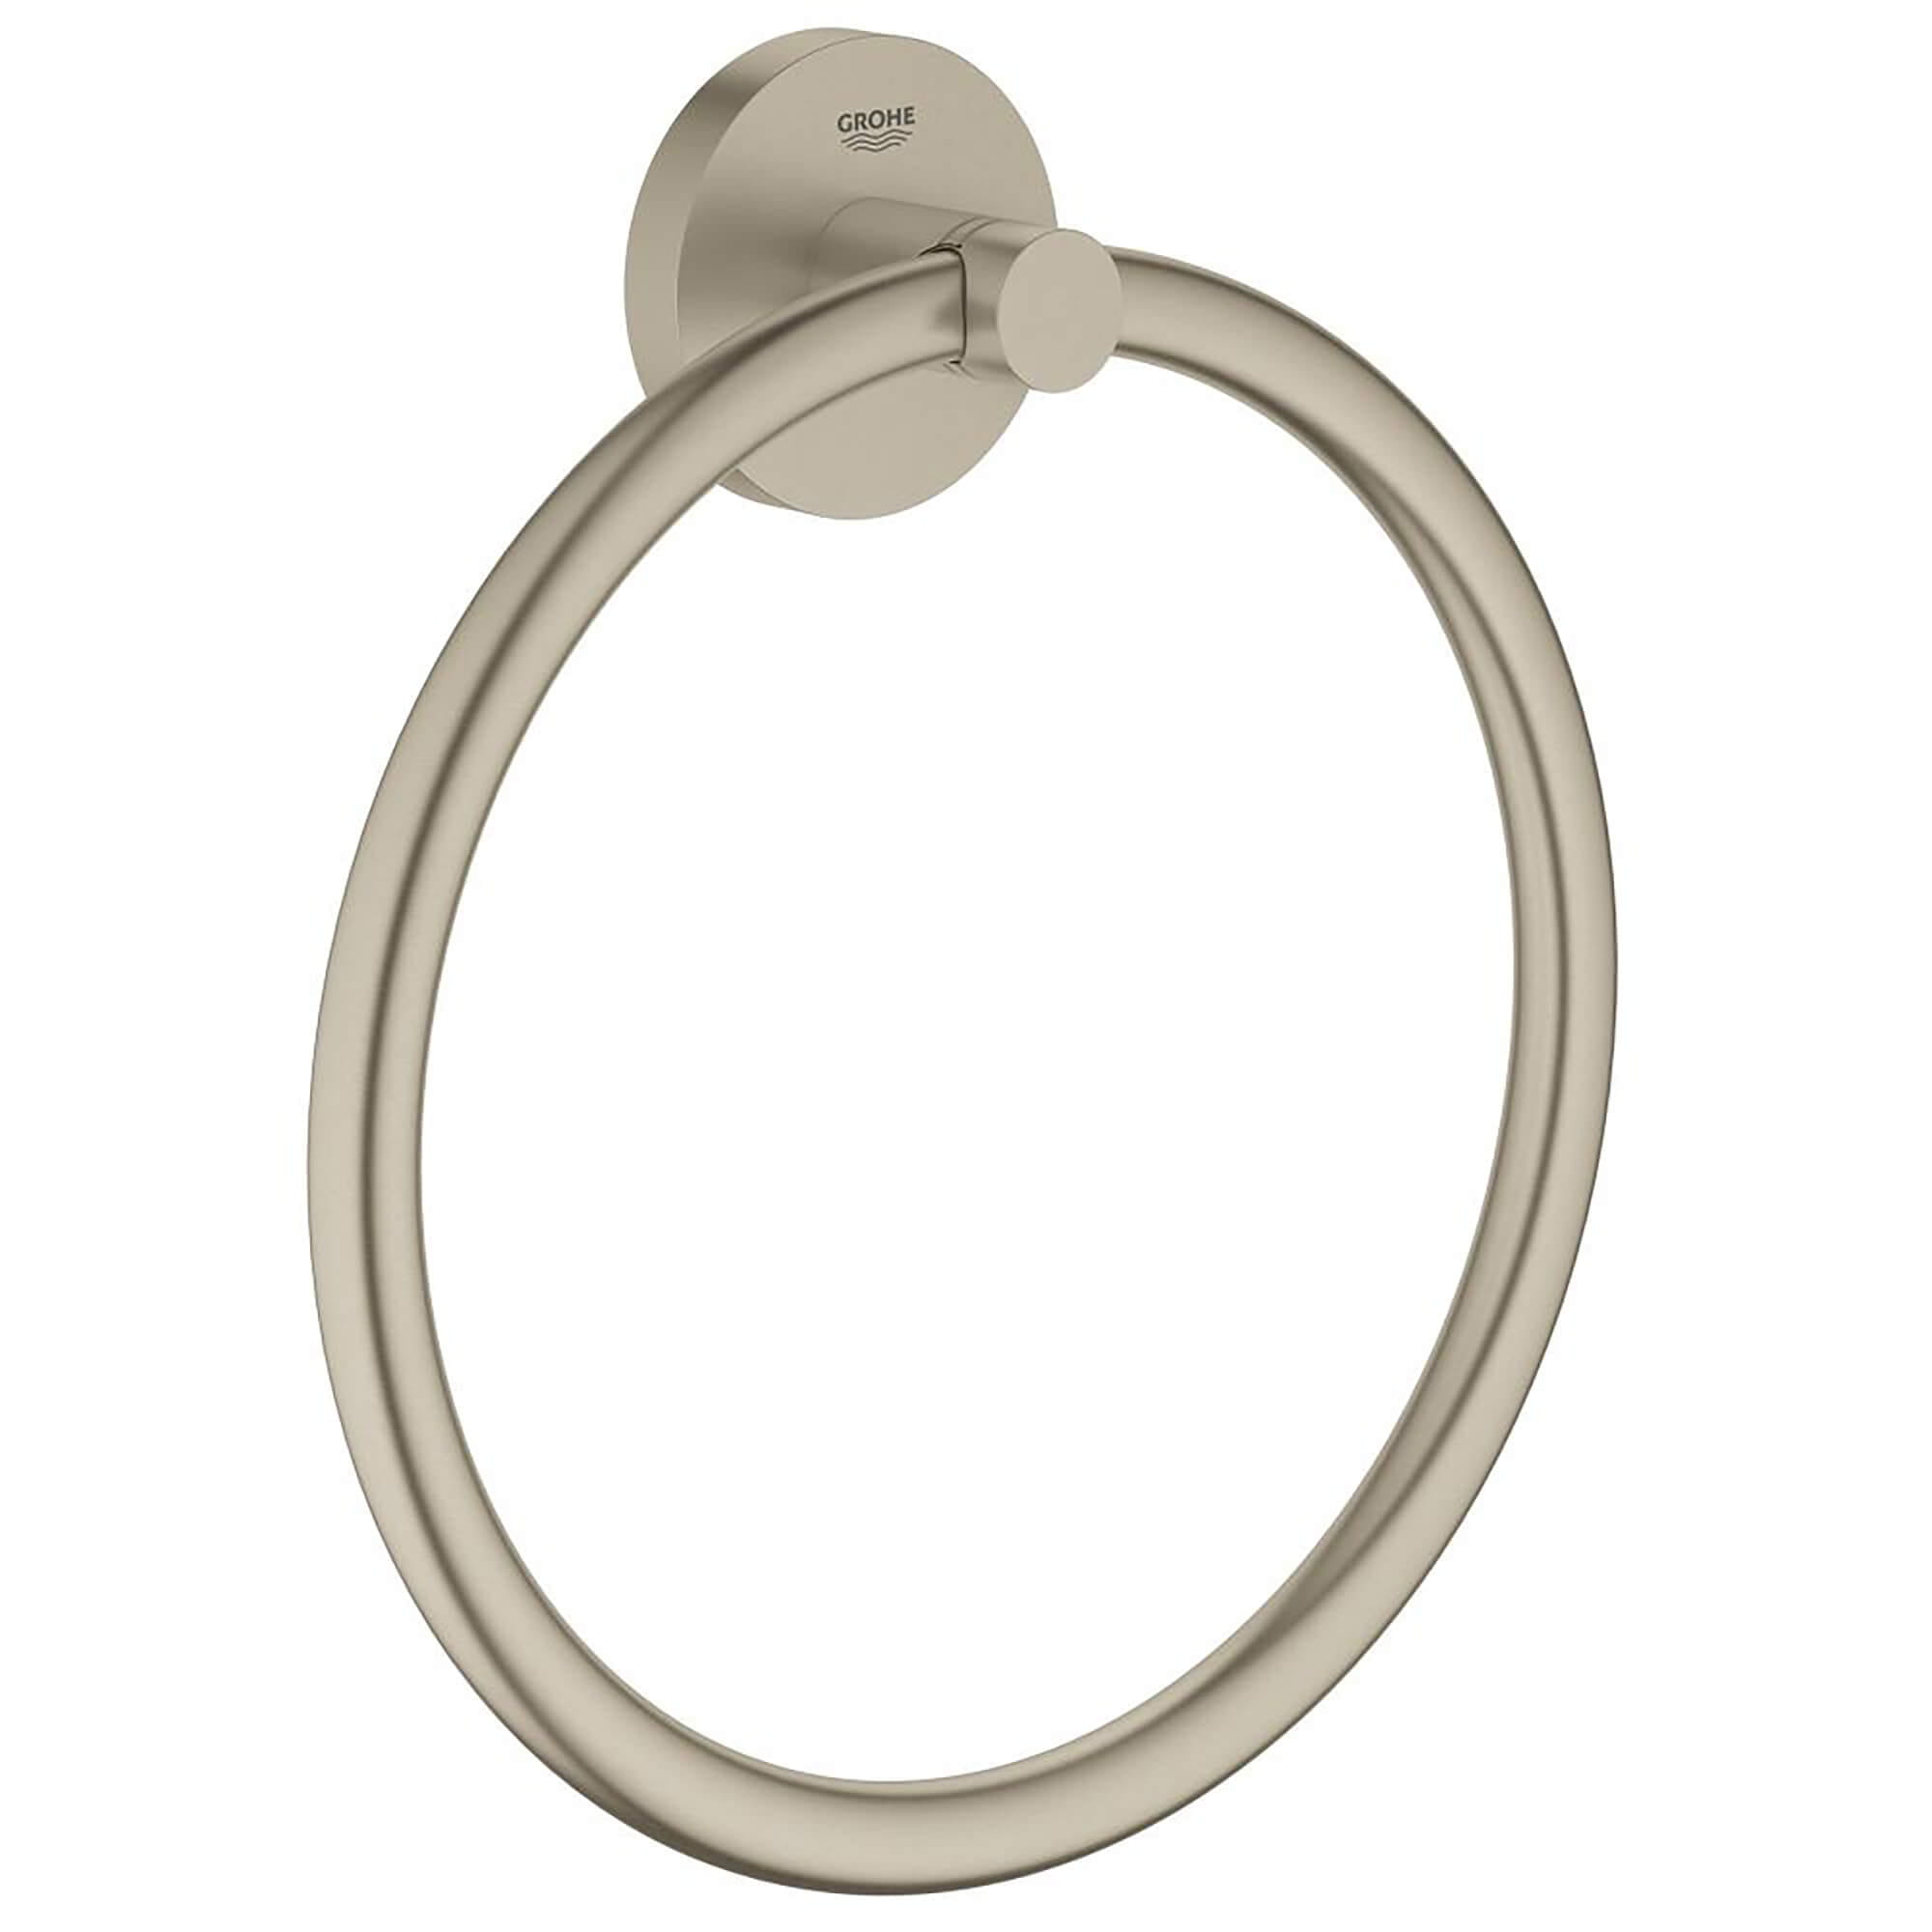 Towel Ring GROHE BRUSHED NICKEL